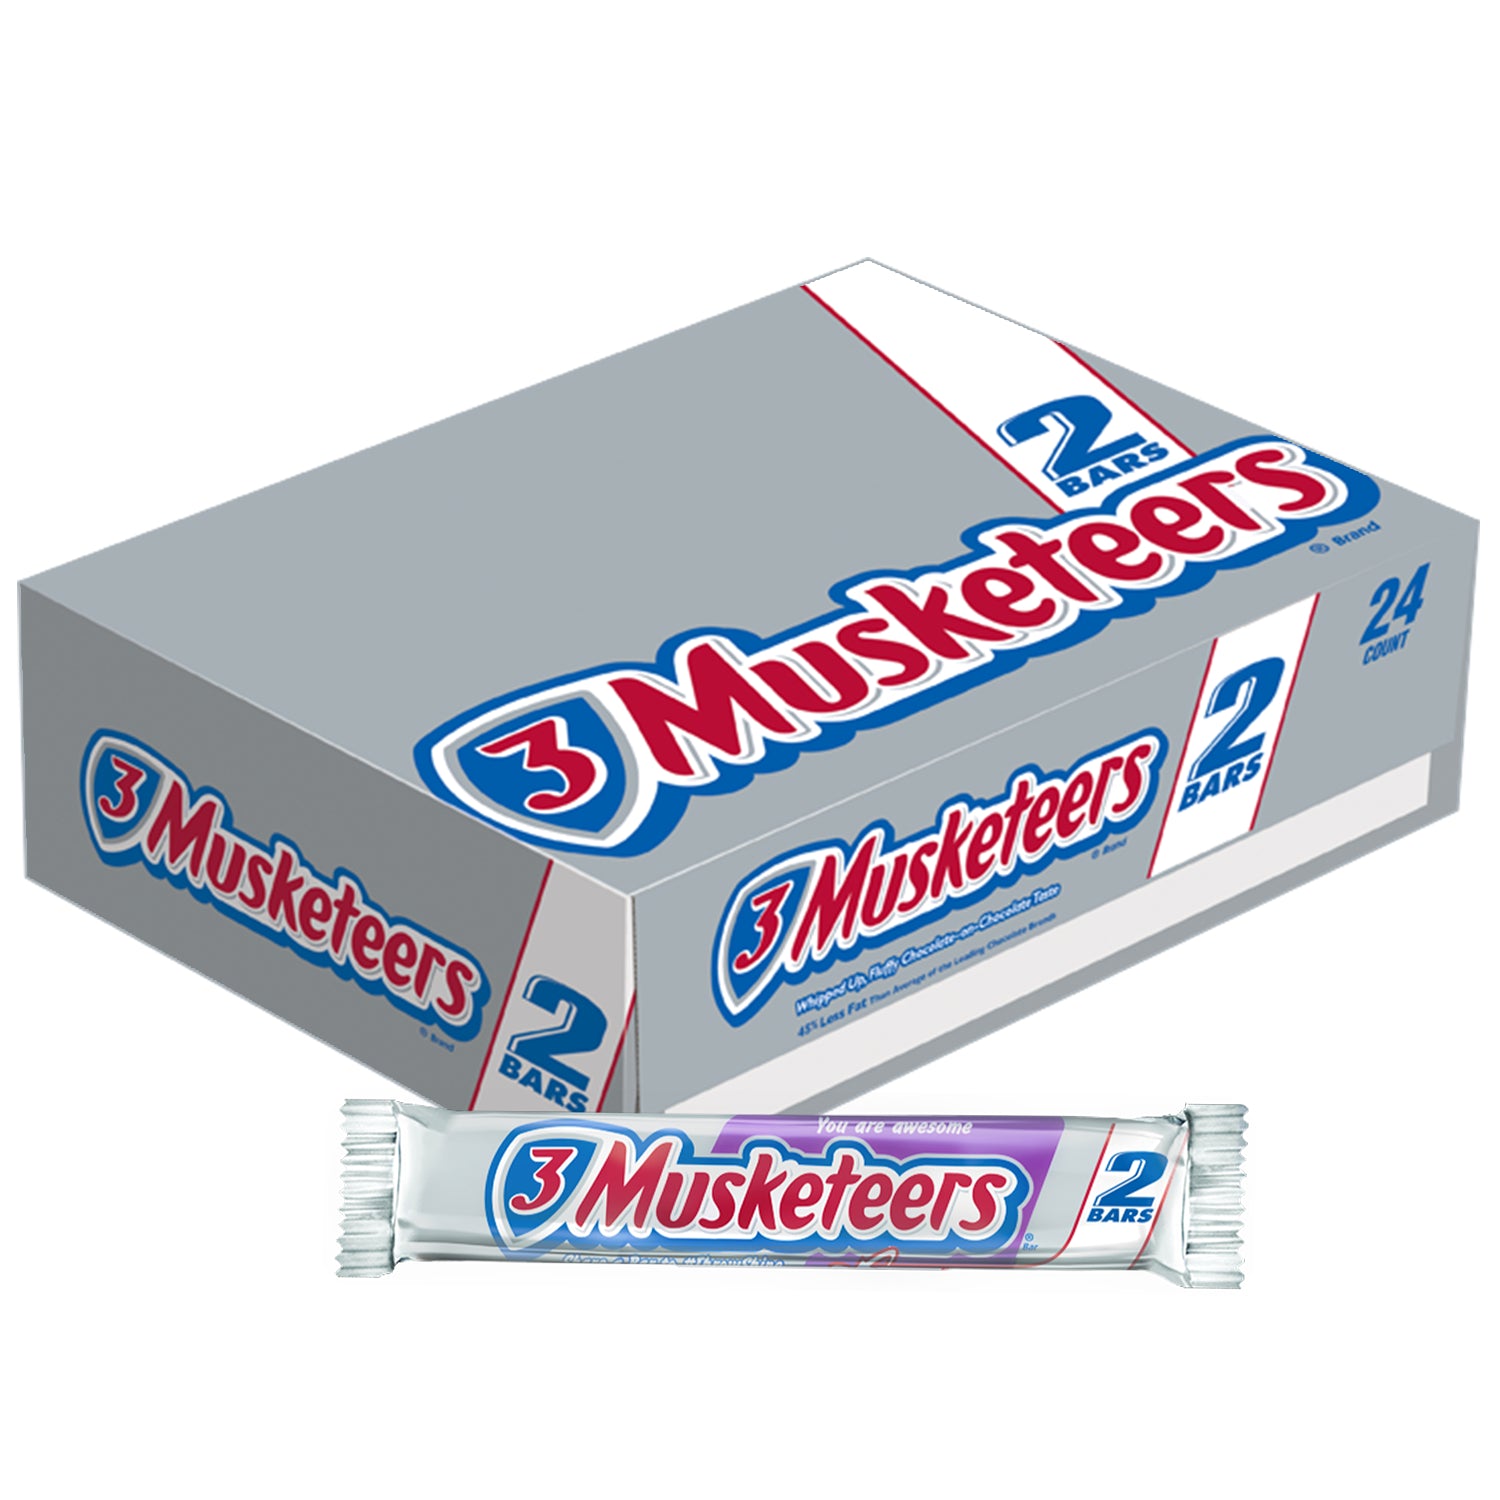 3 MUSKETEERS MULTI-PIECE KING SIZE 6/24 COUNT